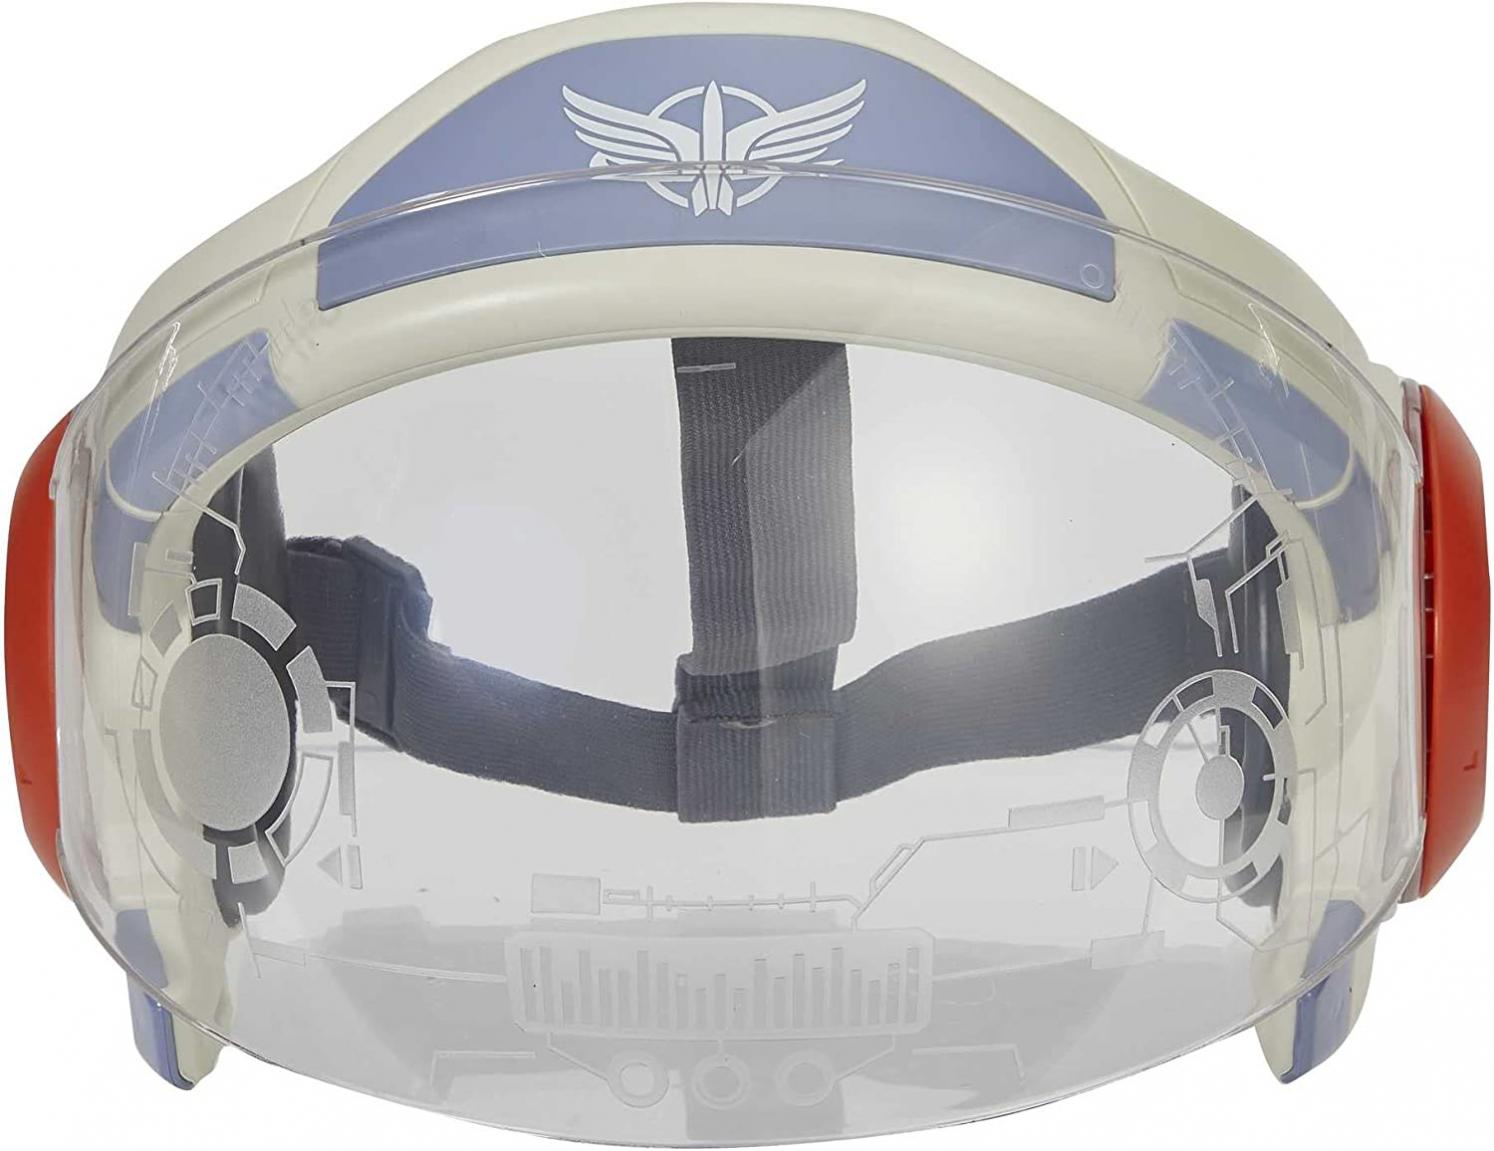 Disney and Pixar Lightyear Role Play Toy, Space Ranger Training Visor, Movie-Inspired Purple White Red Costume Headgear